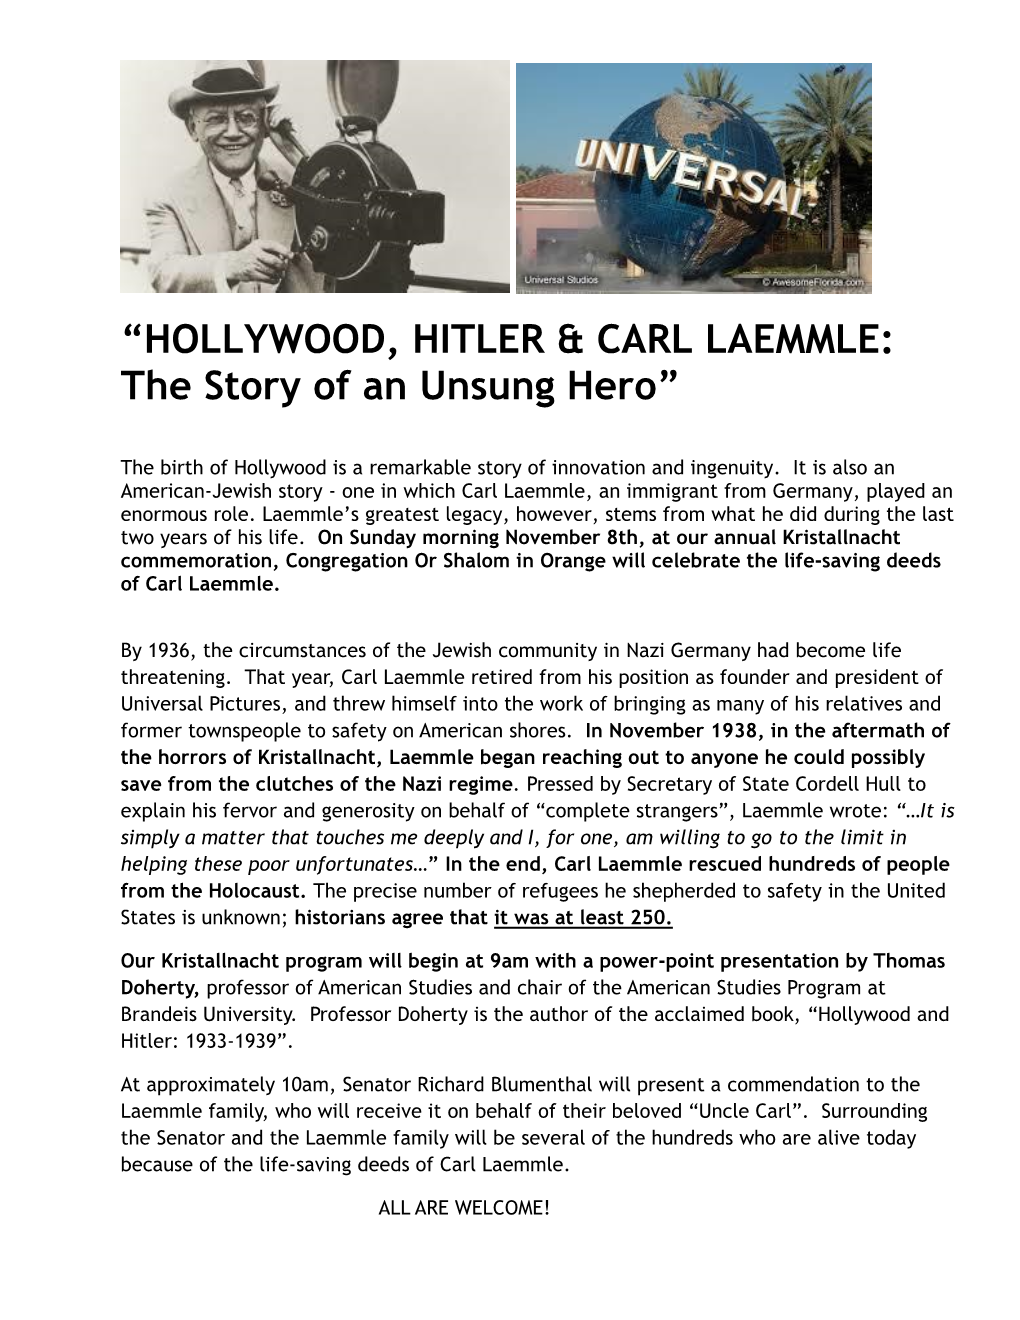 “HOLLYWOOD, HITLER & CARL LAEMMLE: the Story of an Unsung